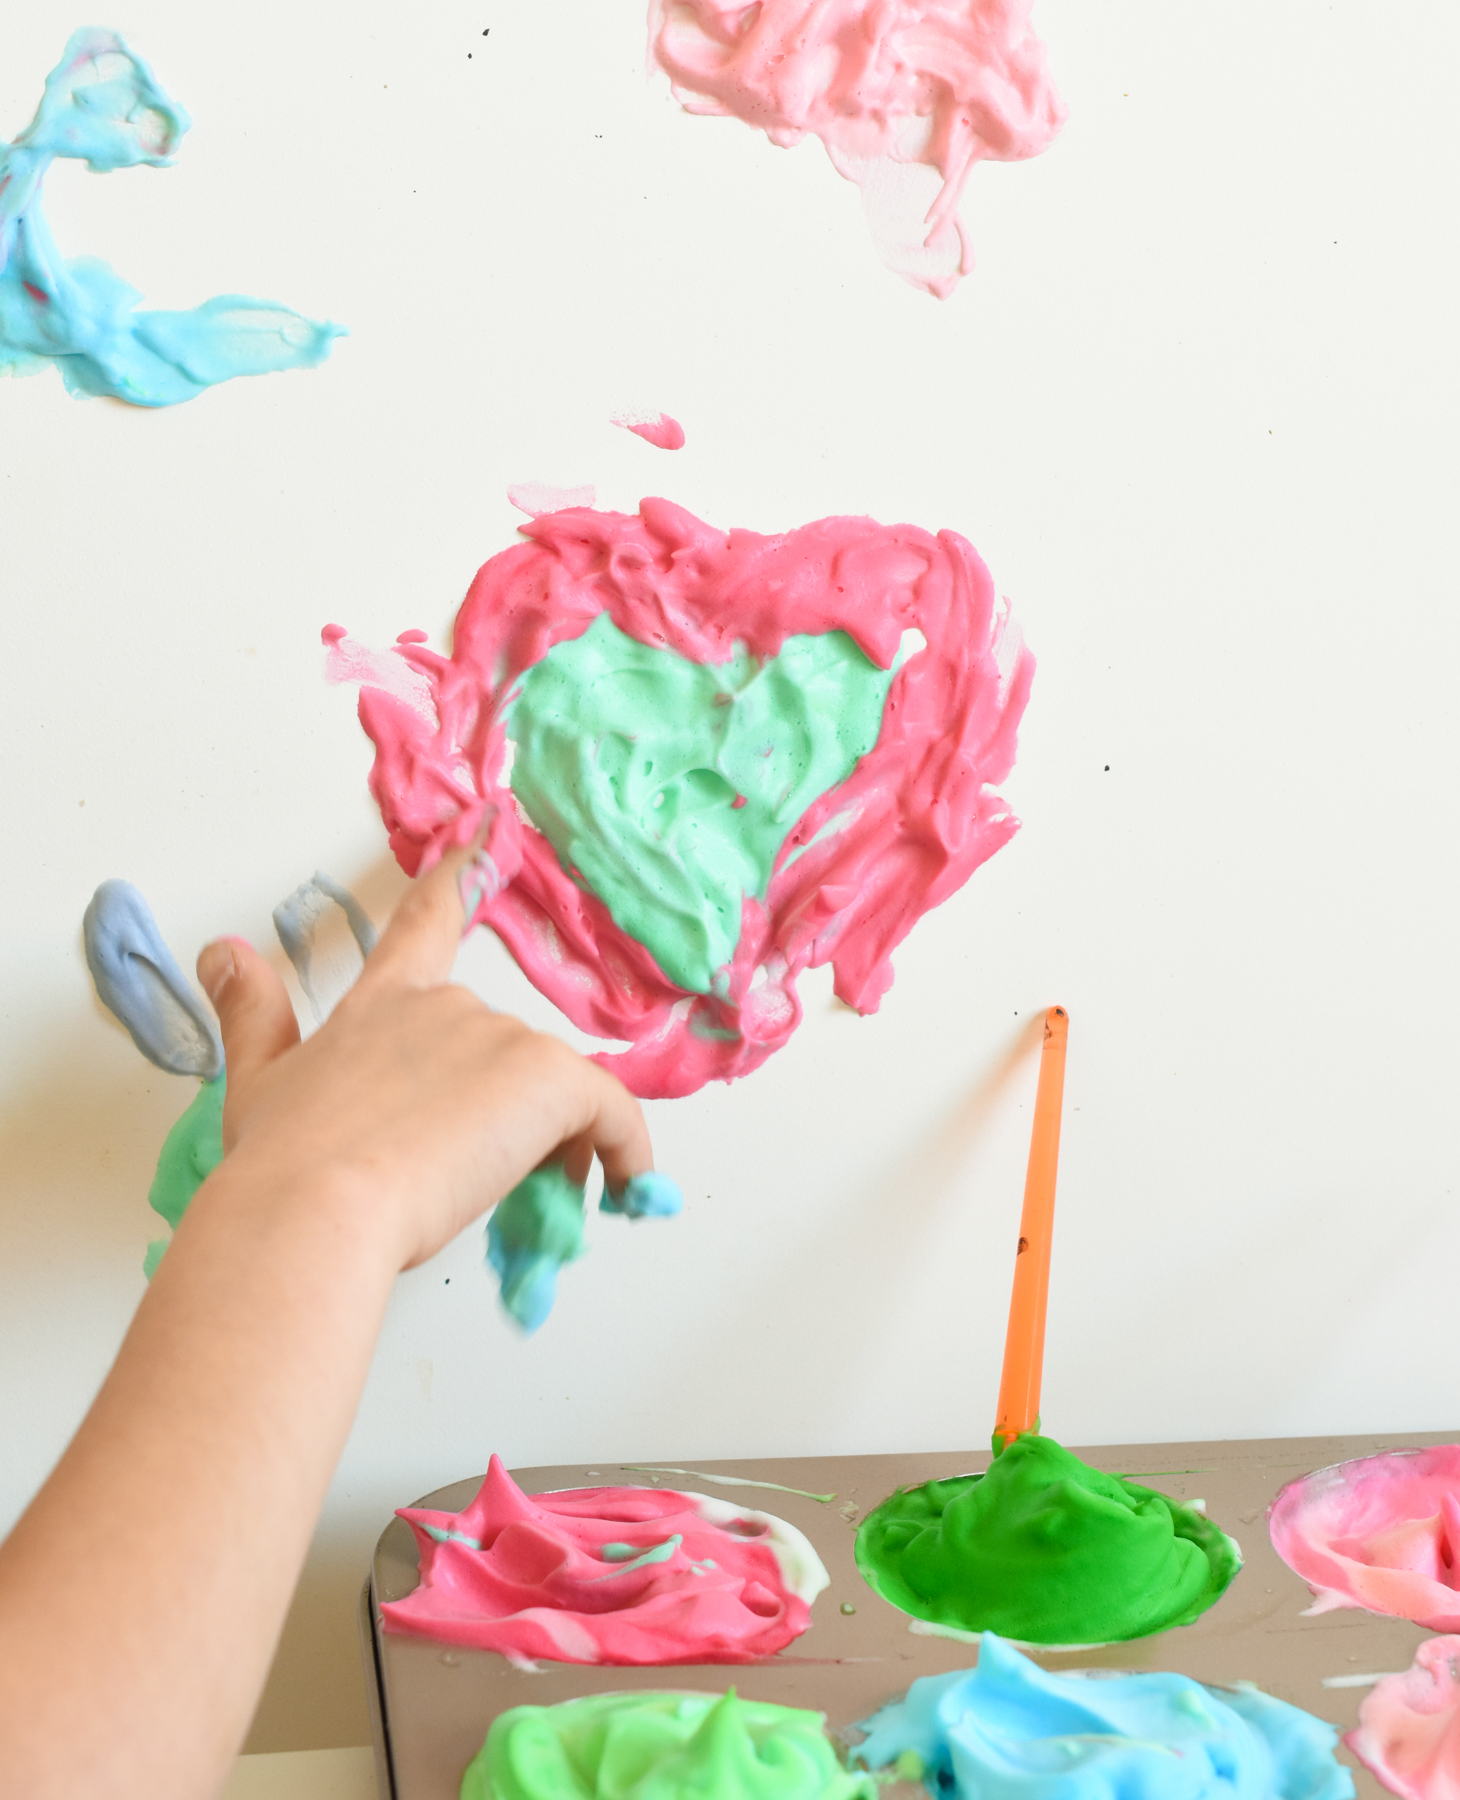 5-Minute Soap Foam Sensory Play - The Craft-at-Home Family